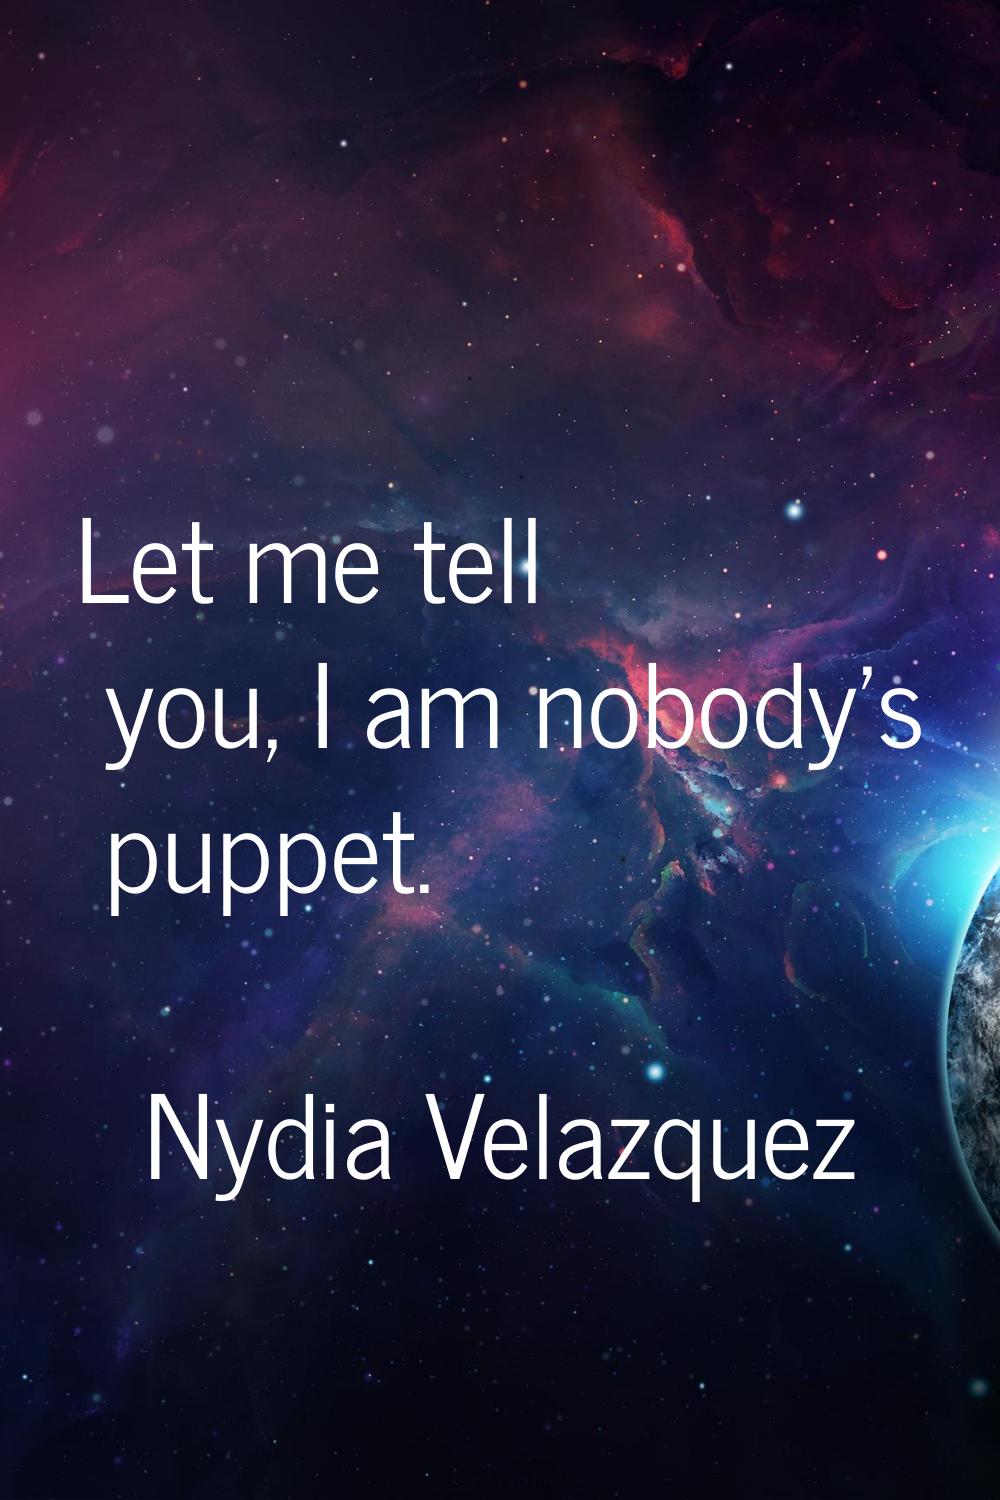 Let me tell you, I am nobody's puppet.